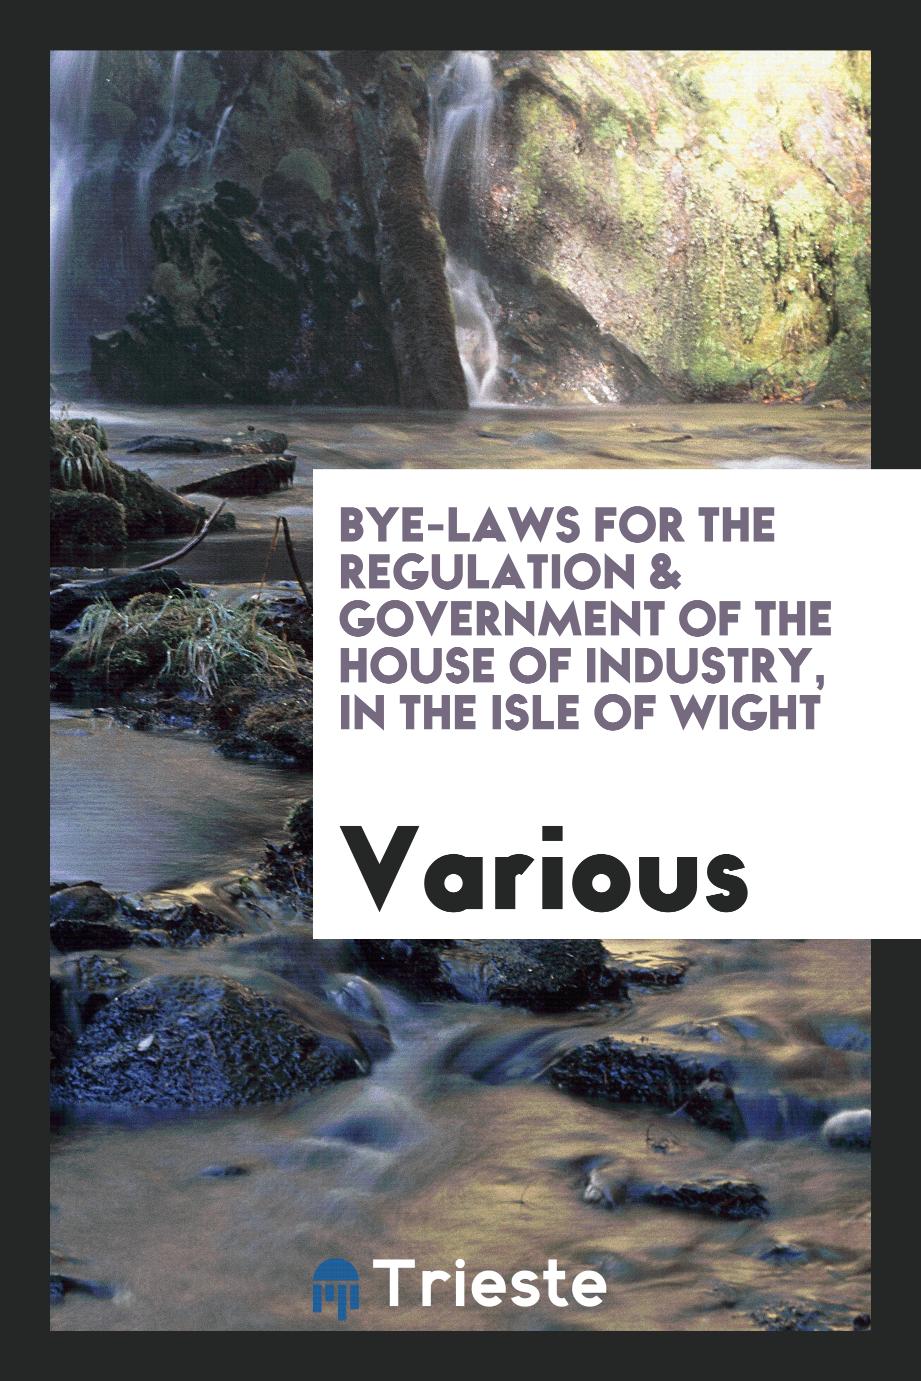 Bye-laws for the Regulation & Government of the House of Industry, in the Isle of Wight